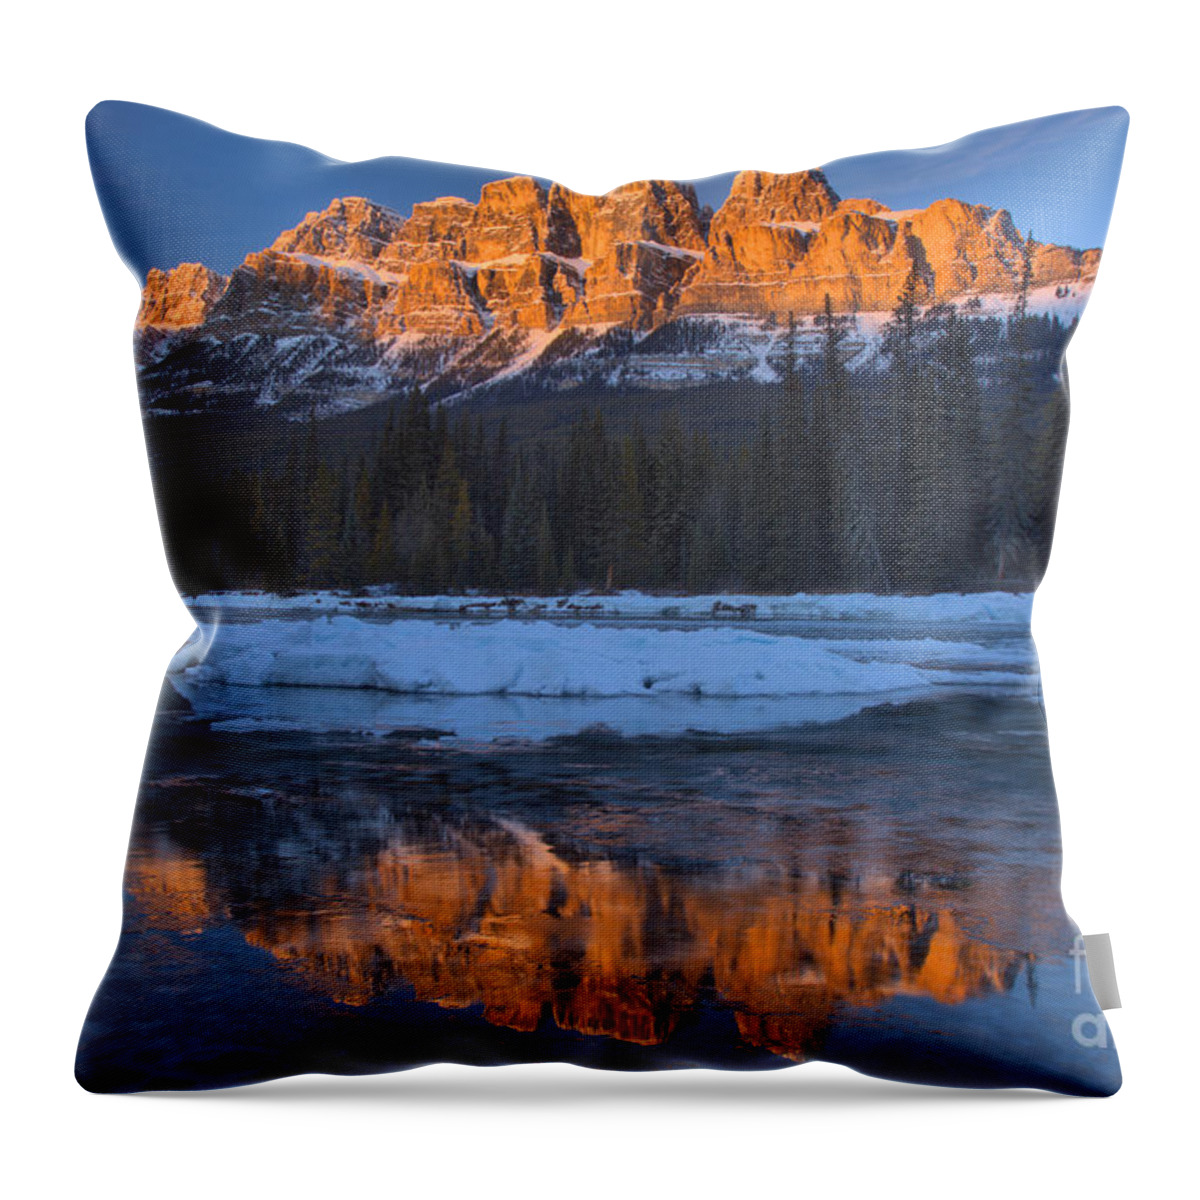 Castle Mountain Throw Pillow featuring the photograph Castle Mountain Red Winter Reflections by Adam Jewell